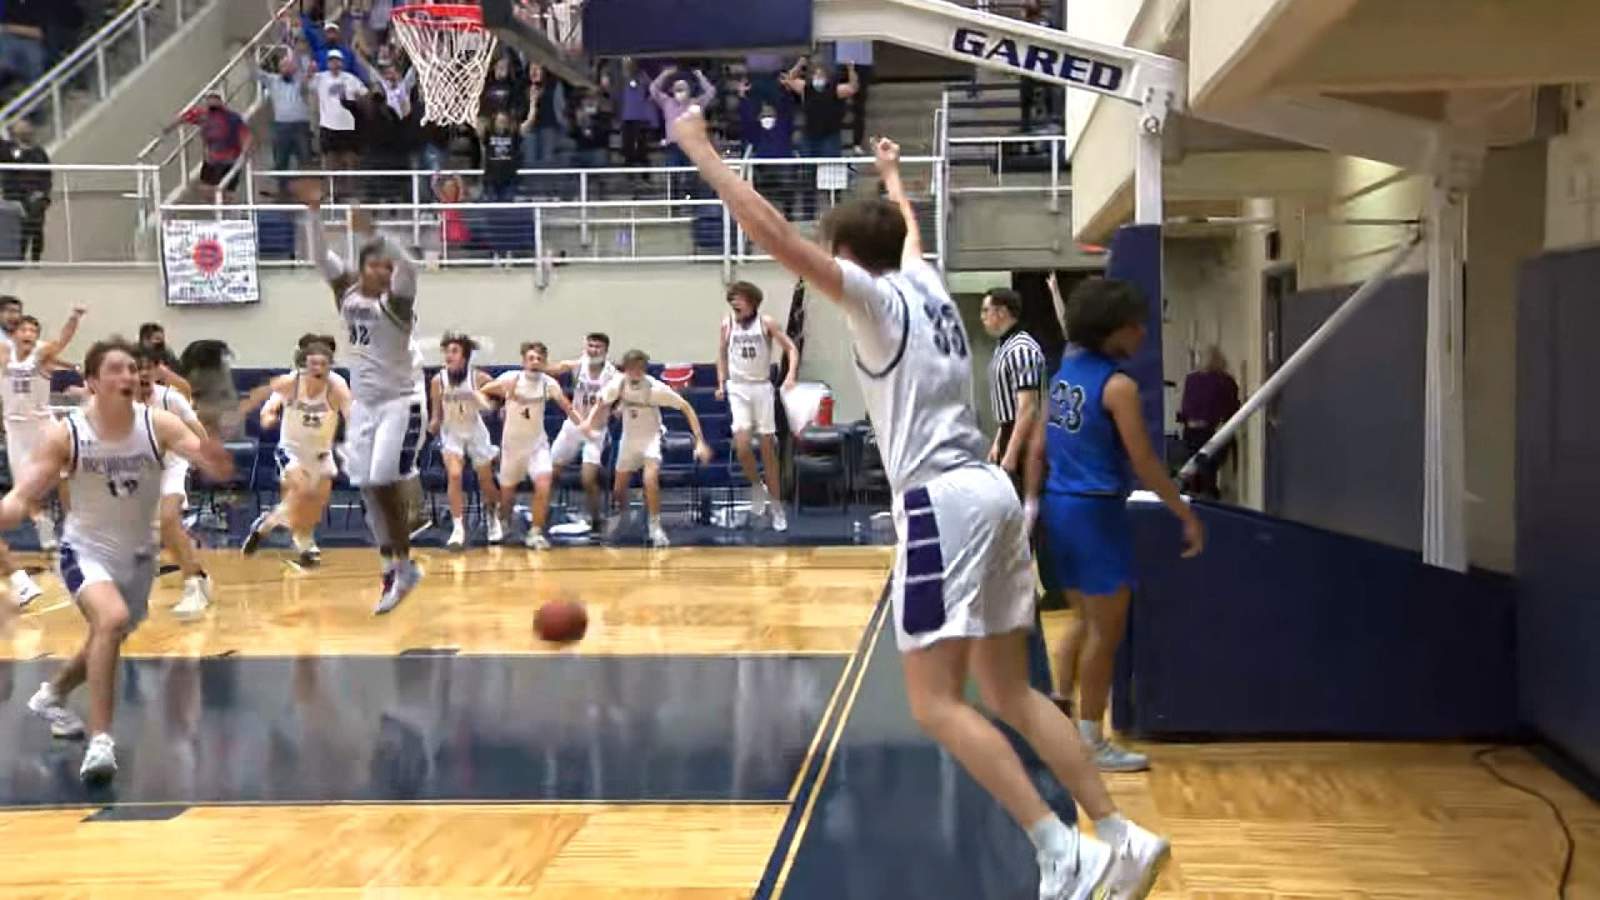 HIGHLIGHTS: Styles’ buzzer-beater sends Boerne boys to State